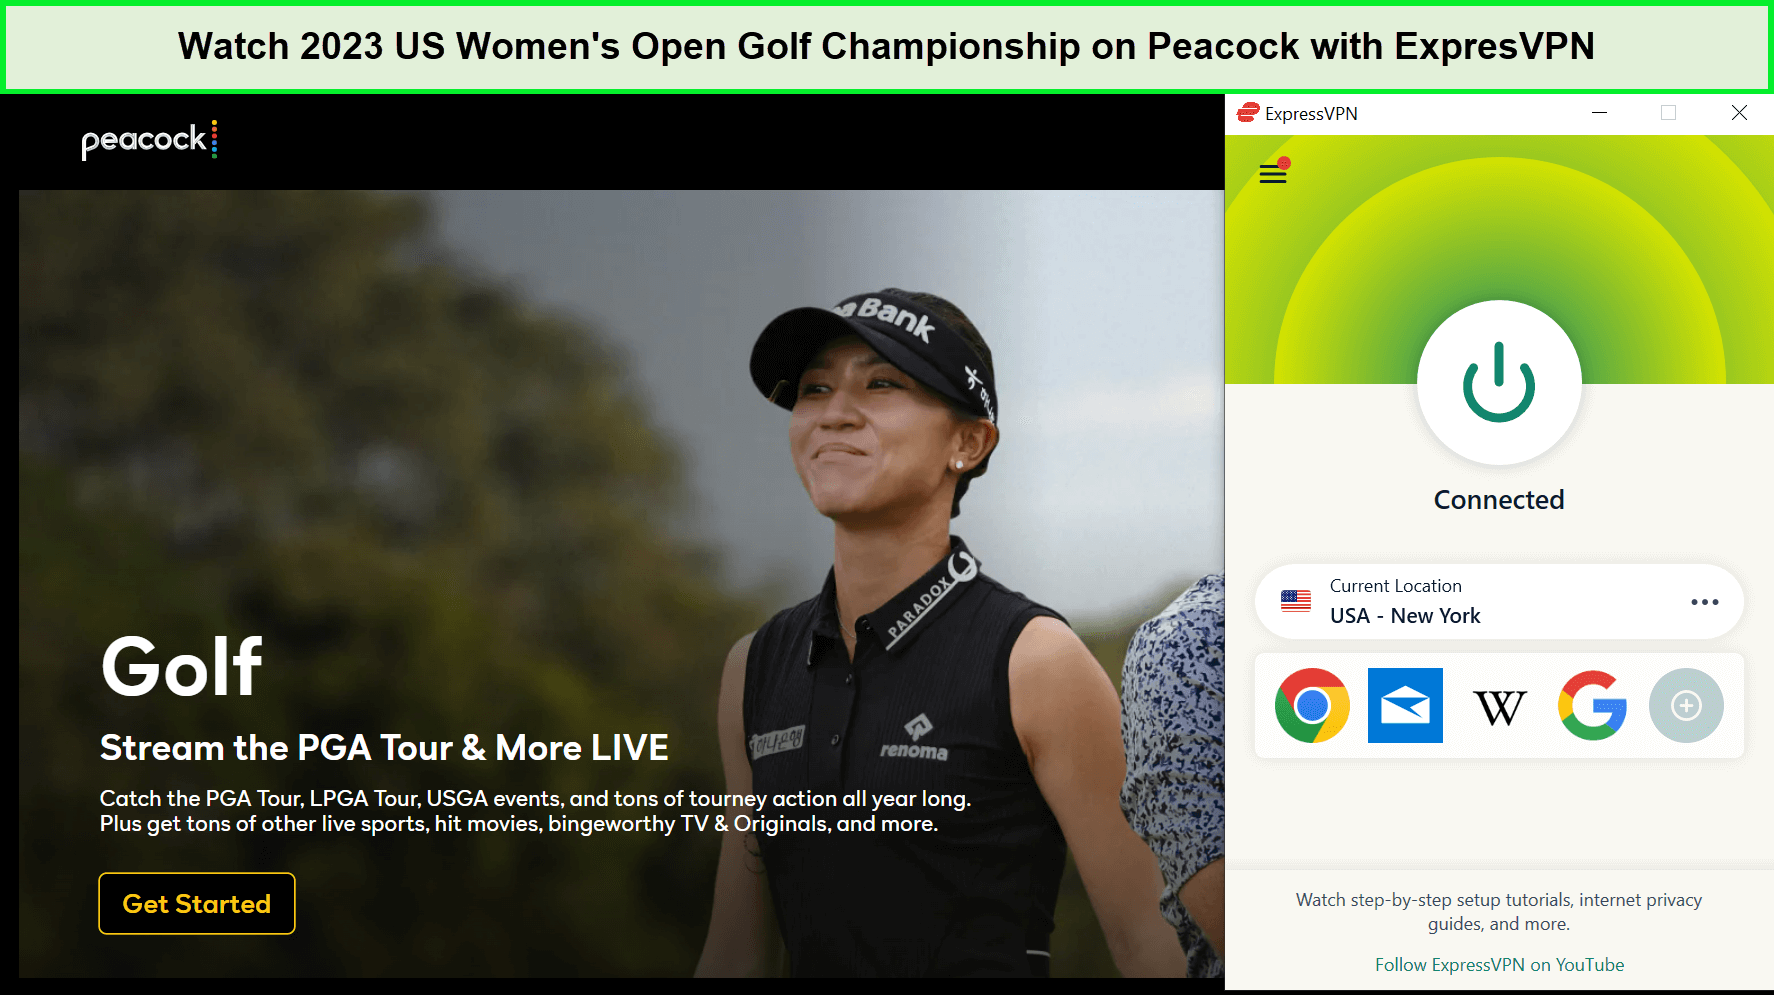 Watch-2023-US-Womens-Open-Golf-Championship-in-Germany-on-Peacock-with-ExpresVPN